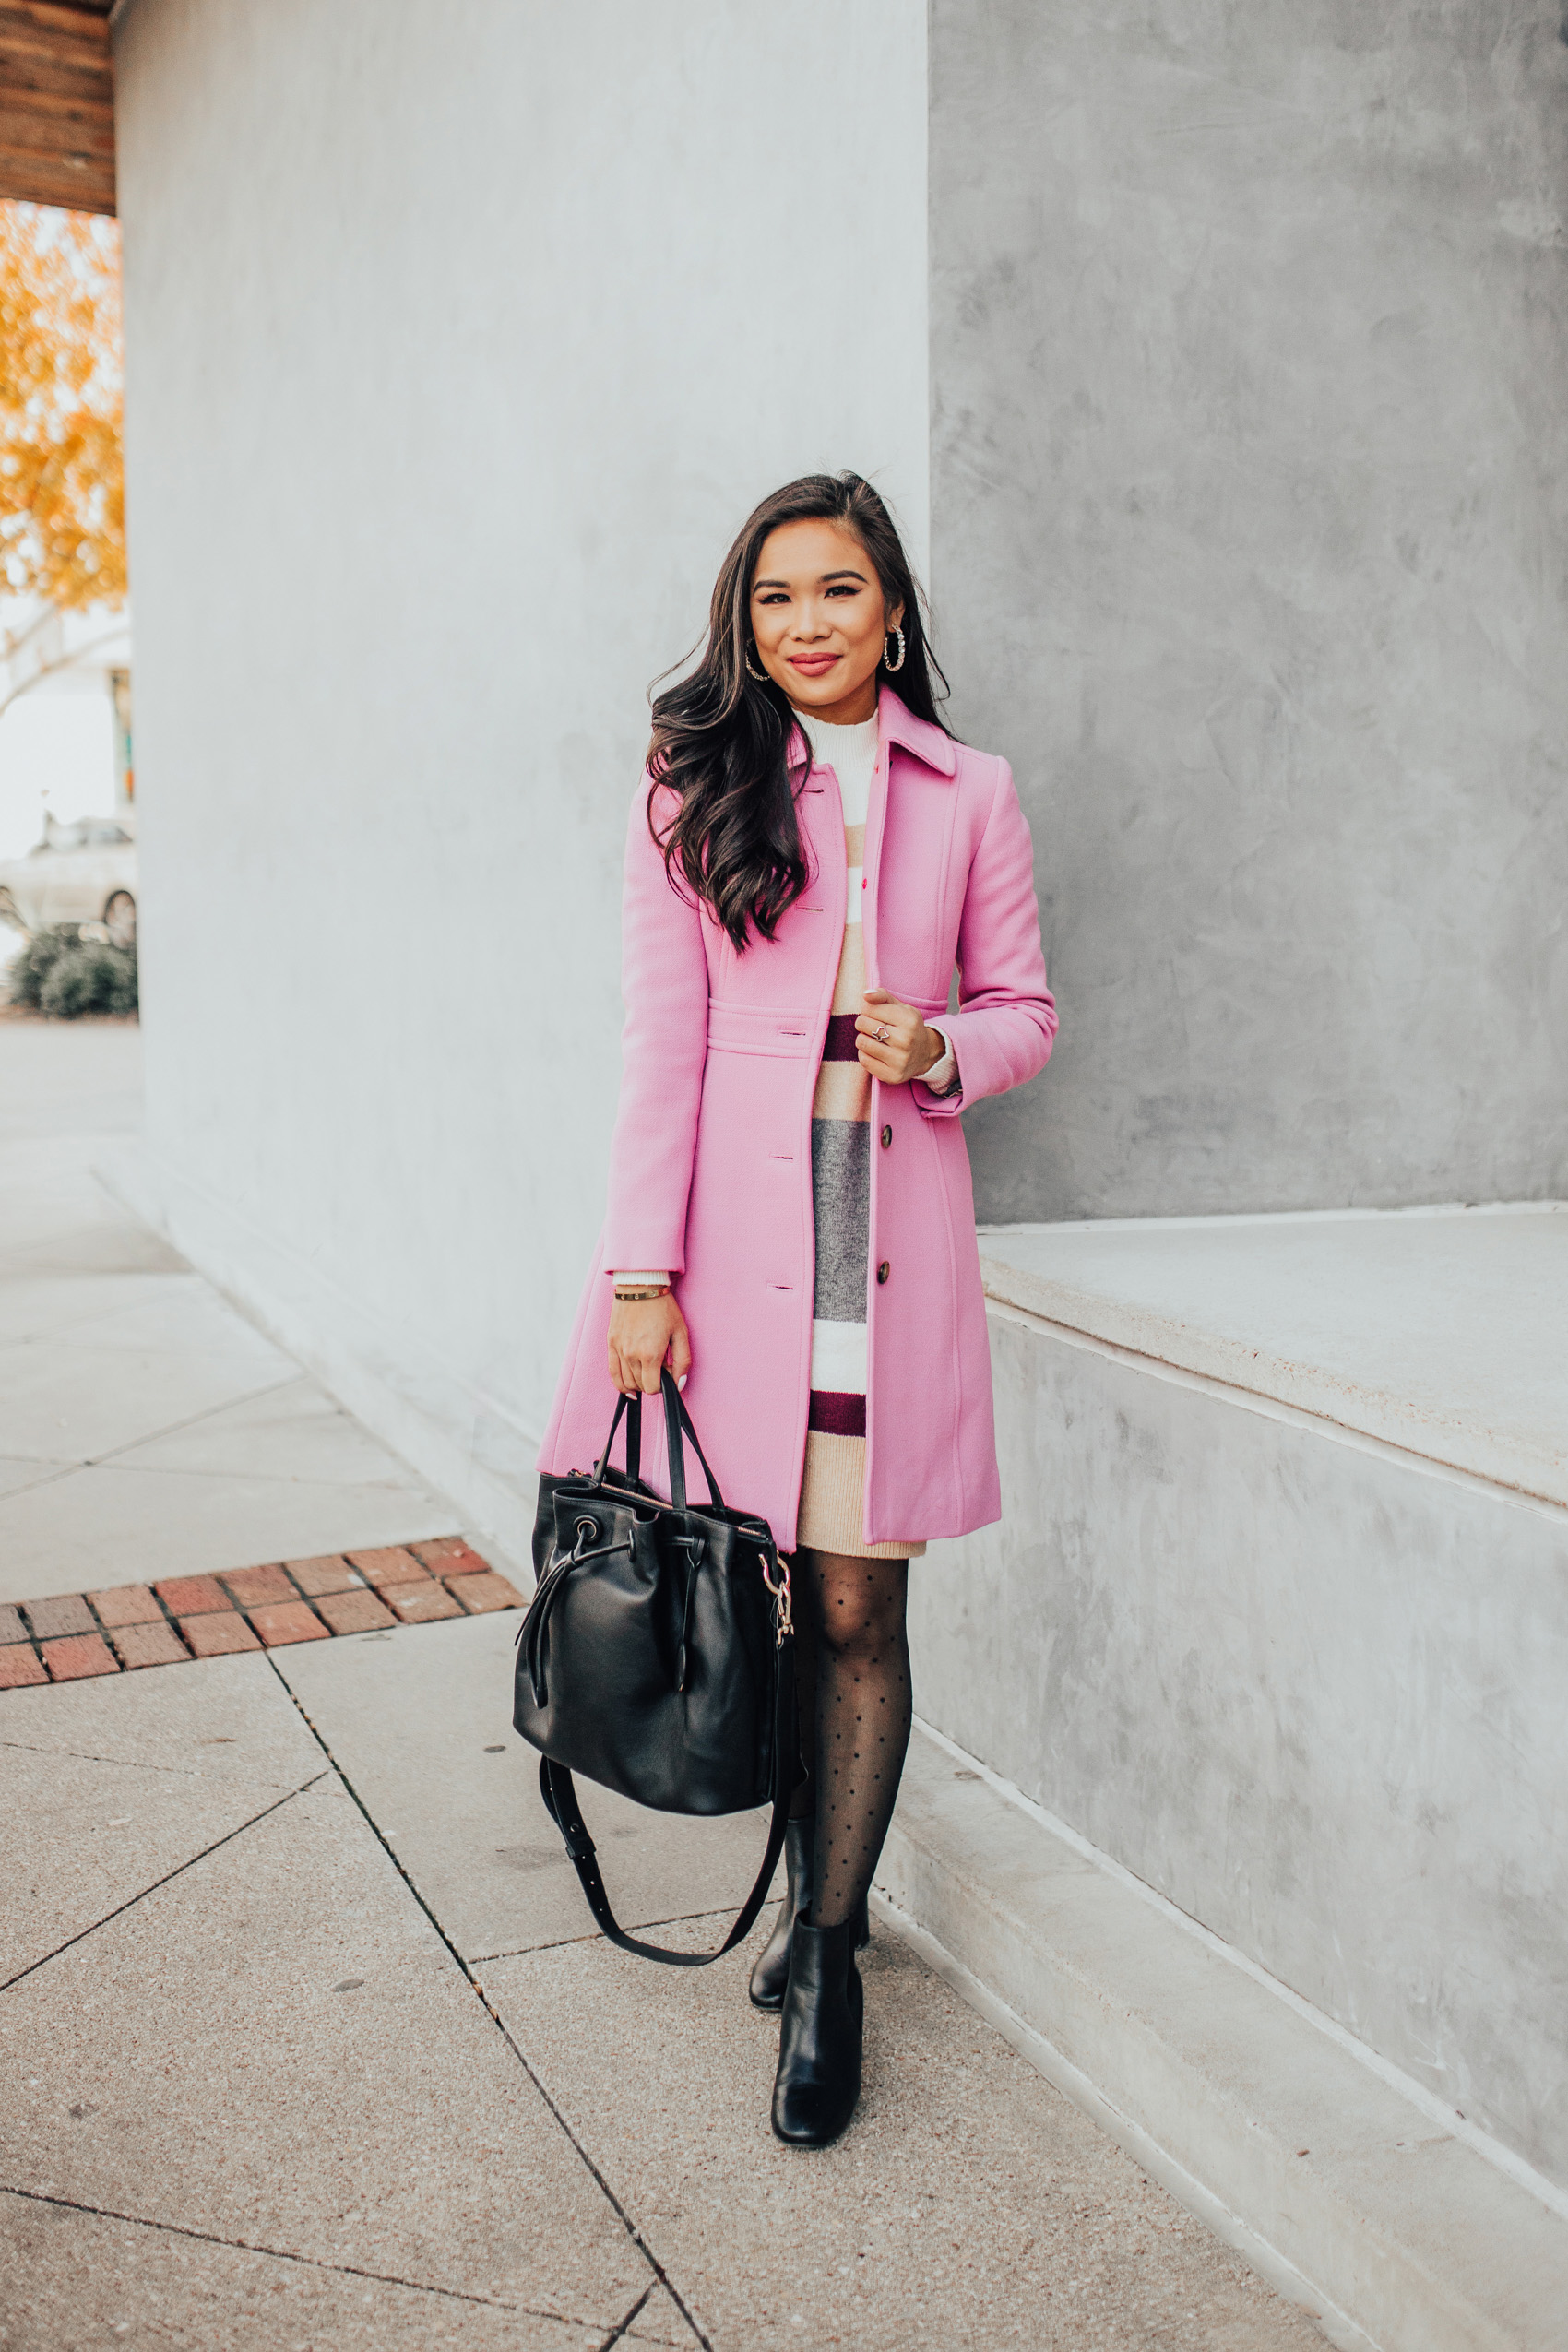 Fall/Winter Style: Pink Faux Fur Coat + Pink Dress – The Style Perk